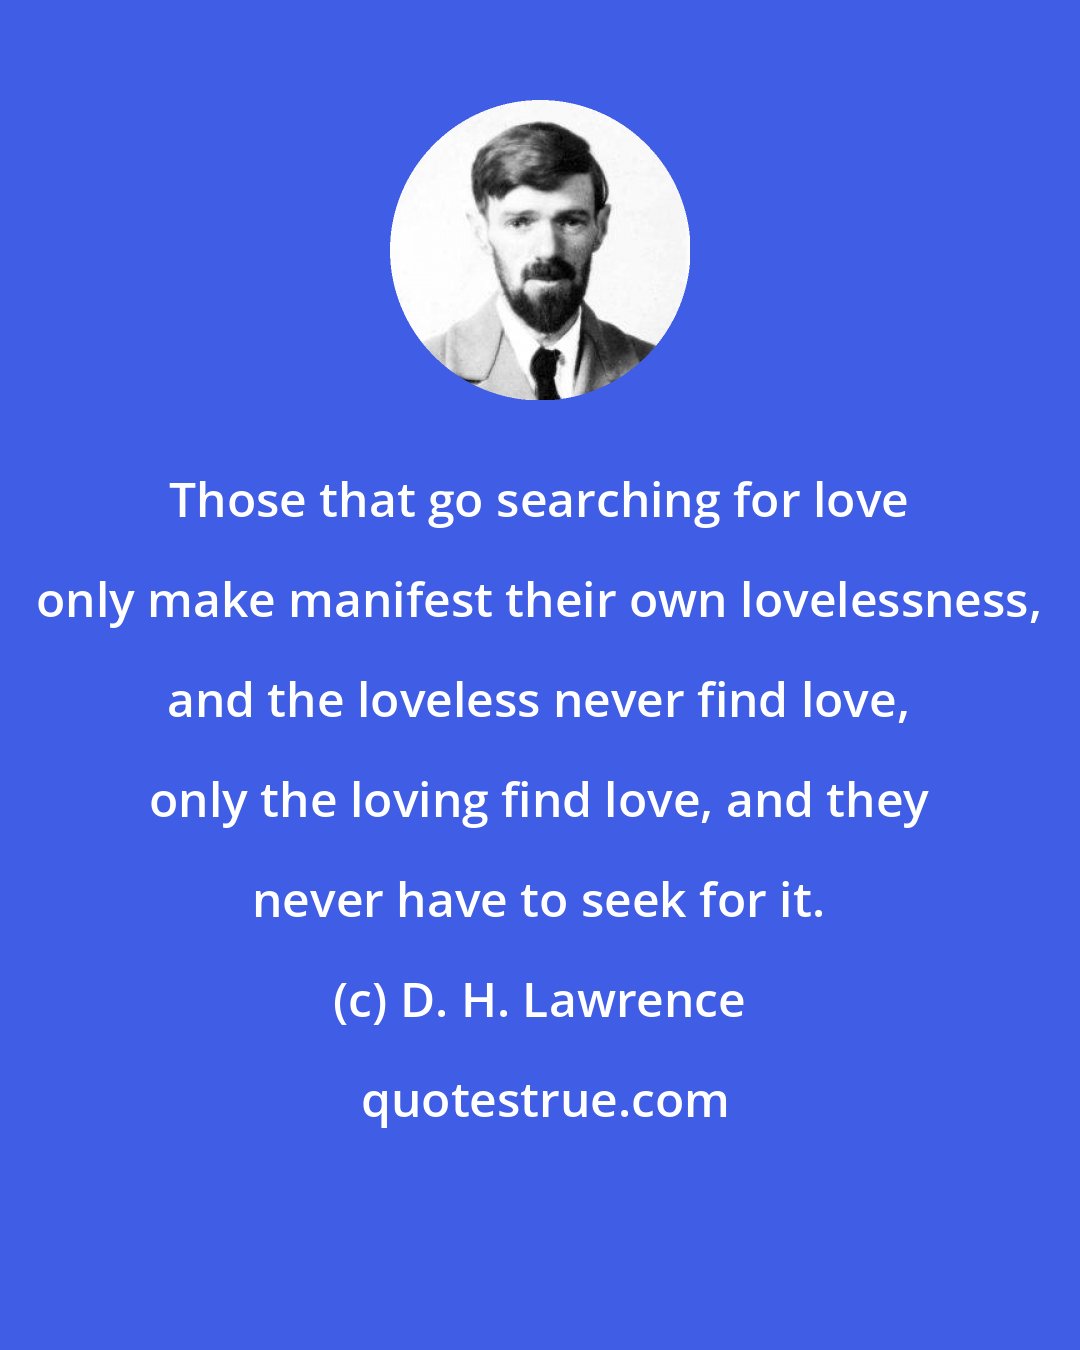 D. H. Lawrence: Those that go searching for love only make manifest their own lovelessness, and the loveless never find love, only the loving find love, and they never have to seek for it.